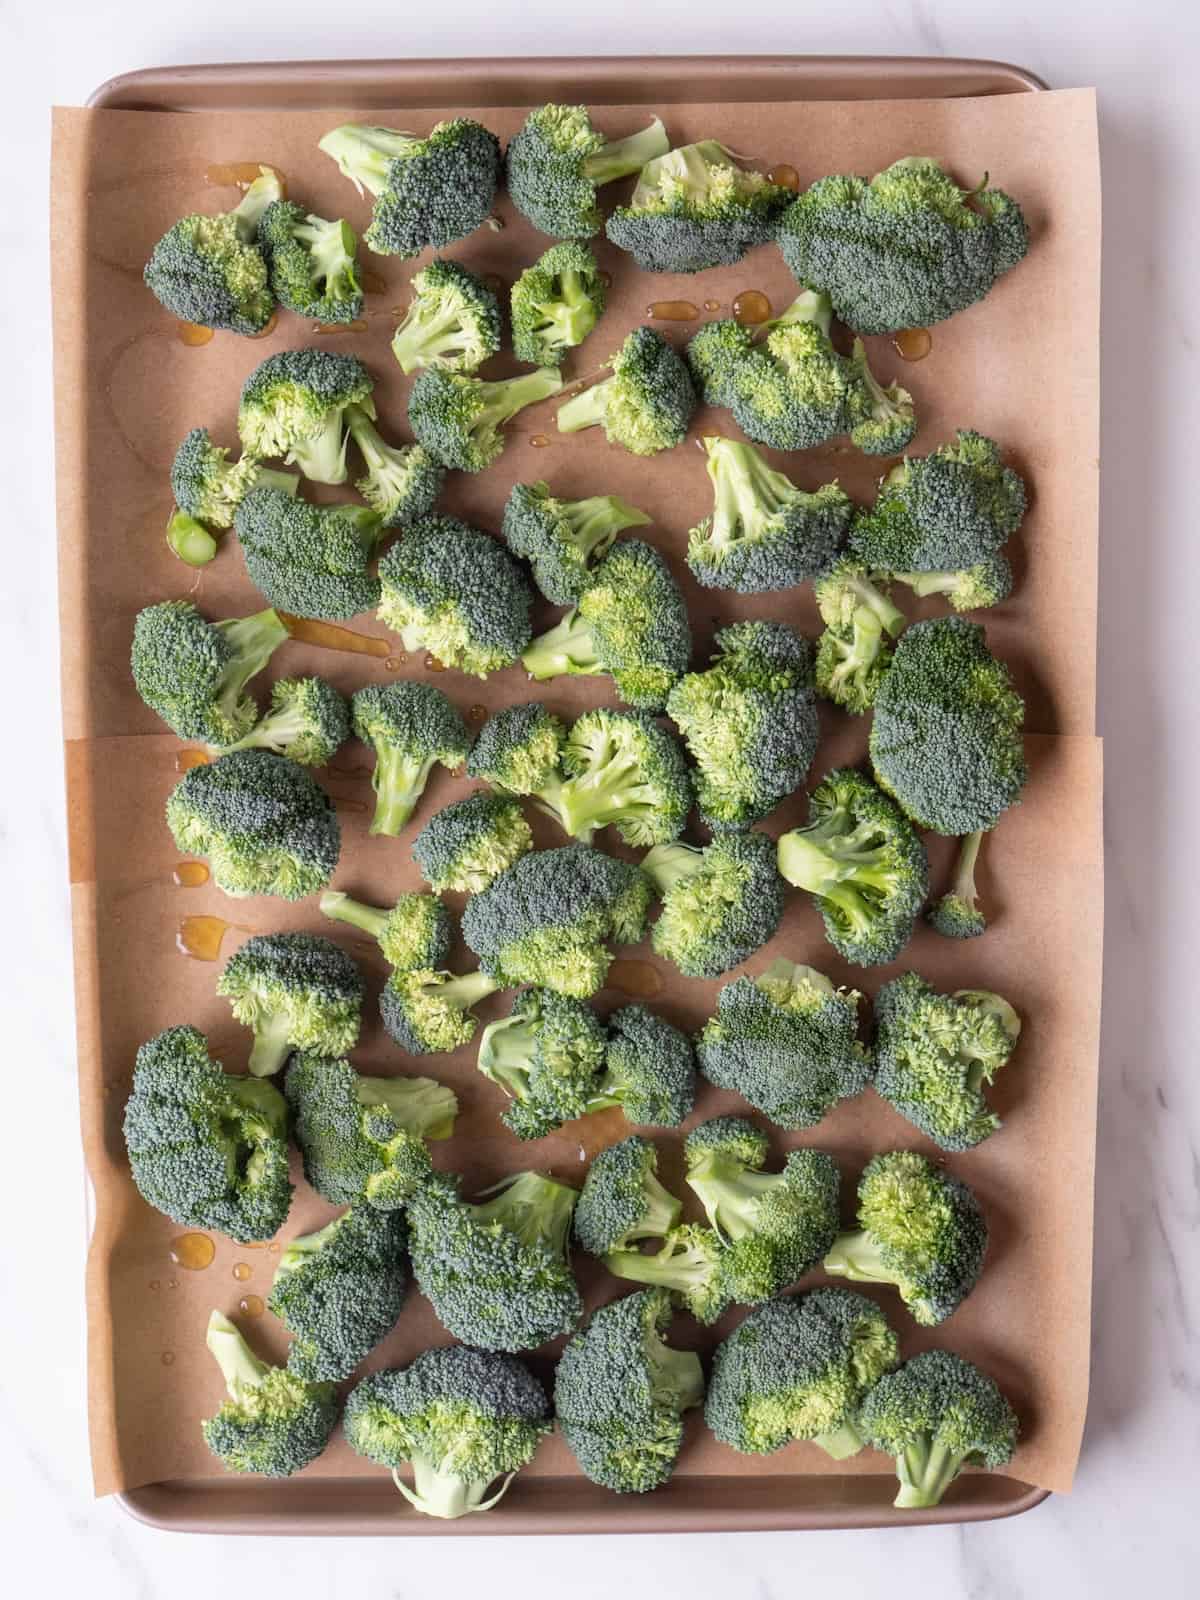 A parchment-lined baking sheet with broccoli florets spread out evenly in a single layer.